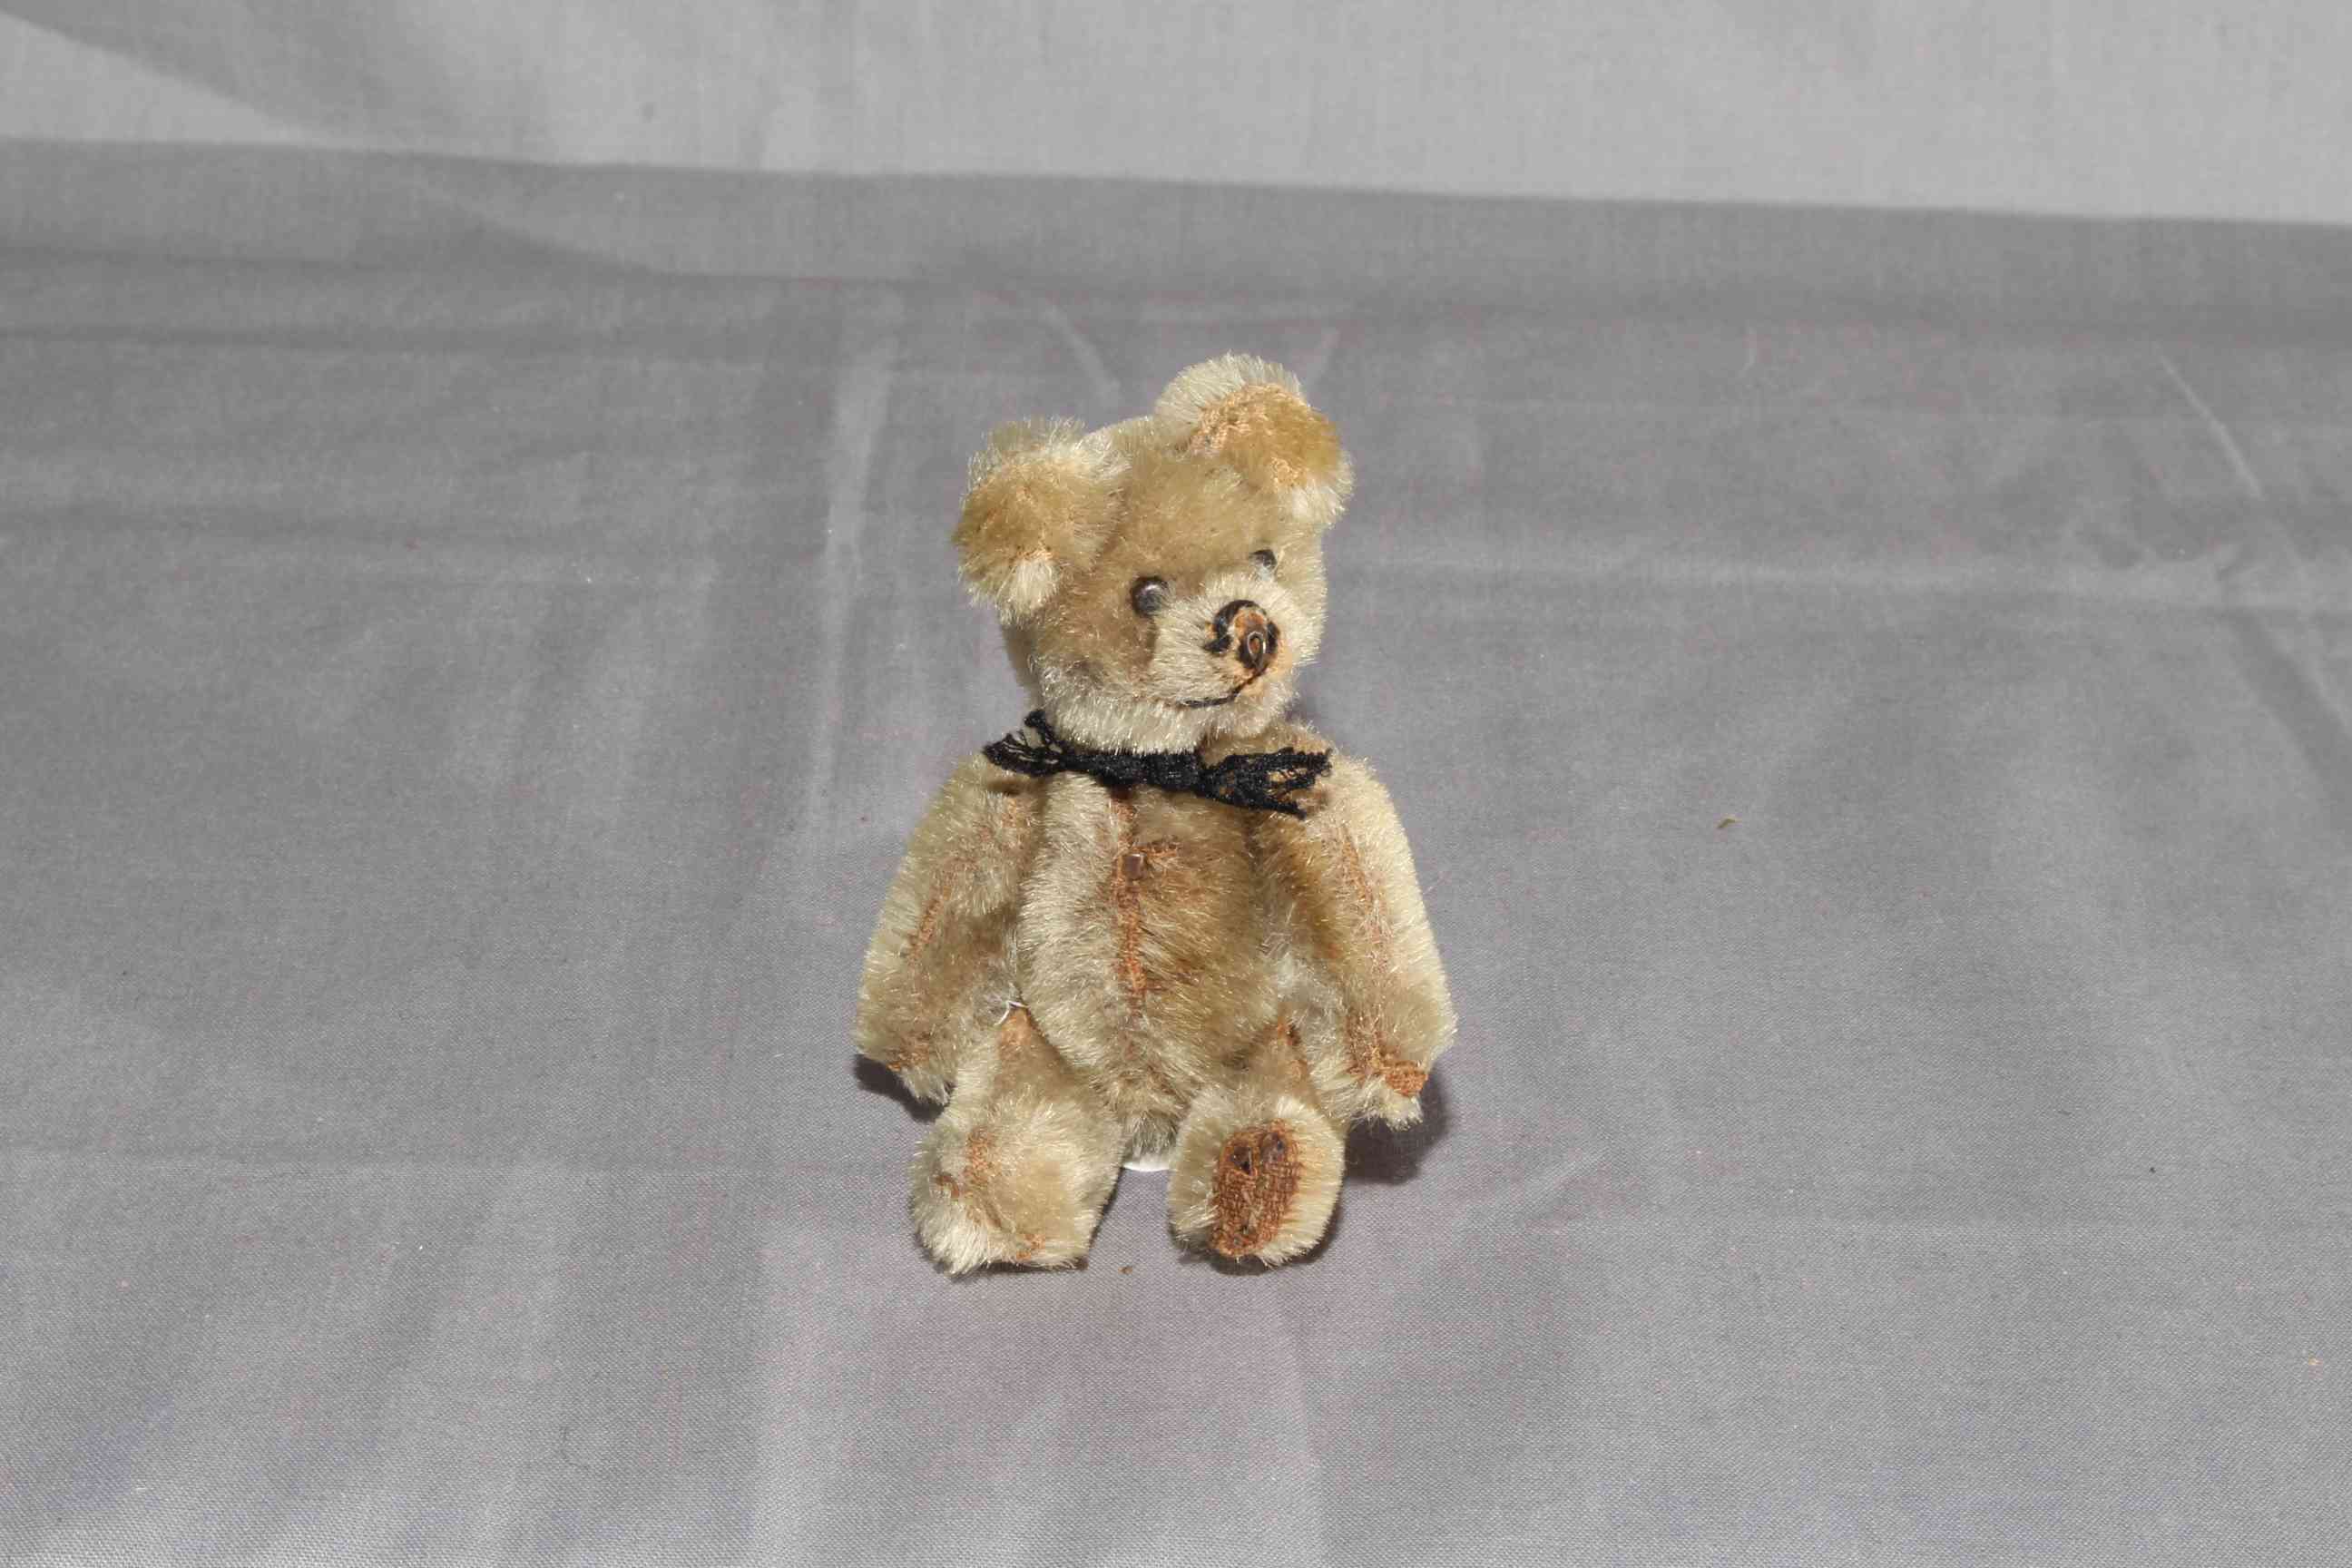 1930s Schuco Jointed Teddy Bear. Mohair with Black Lace Ribbon. Excellent.